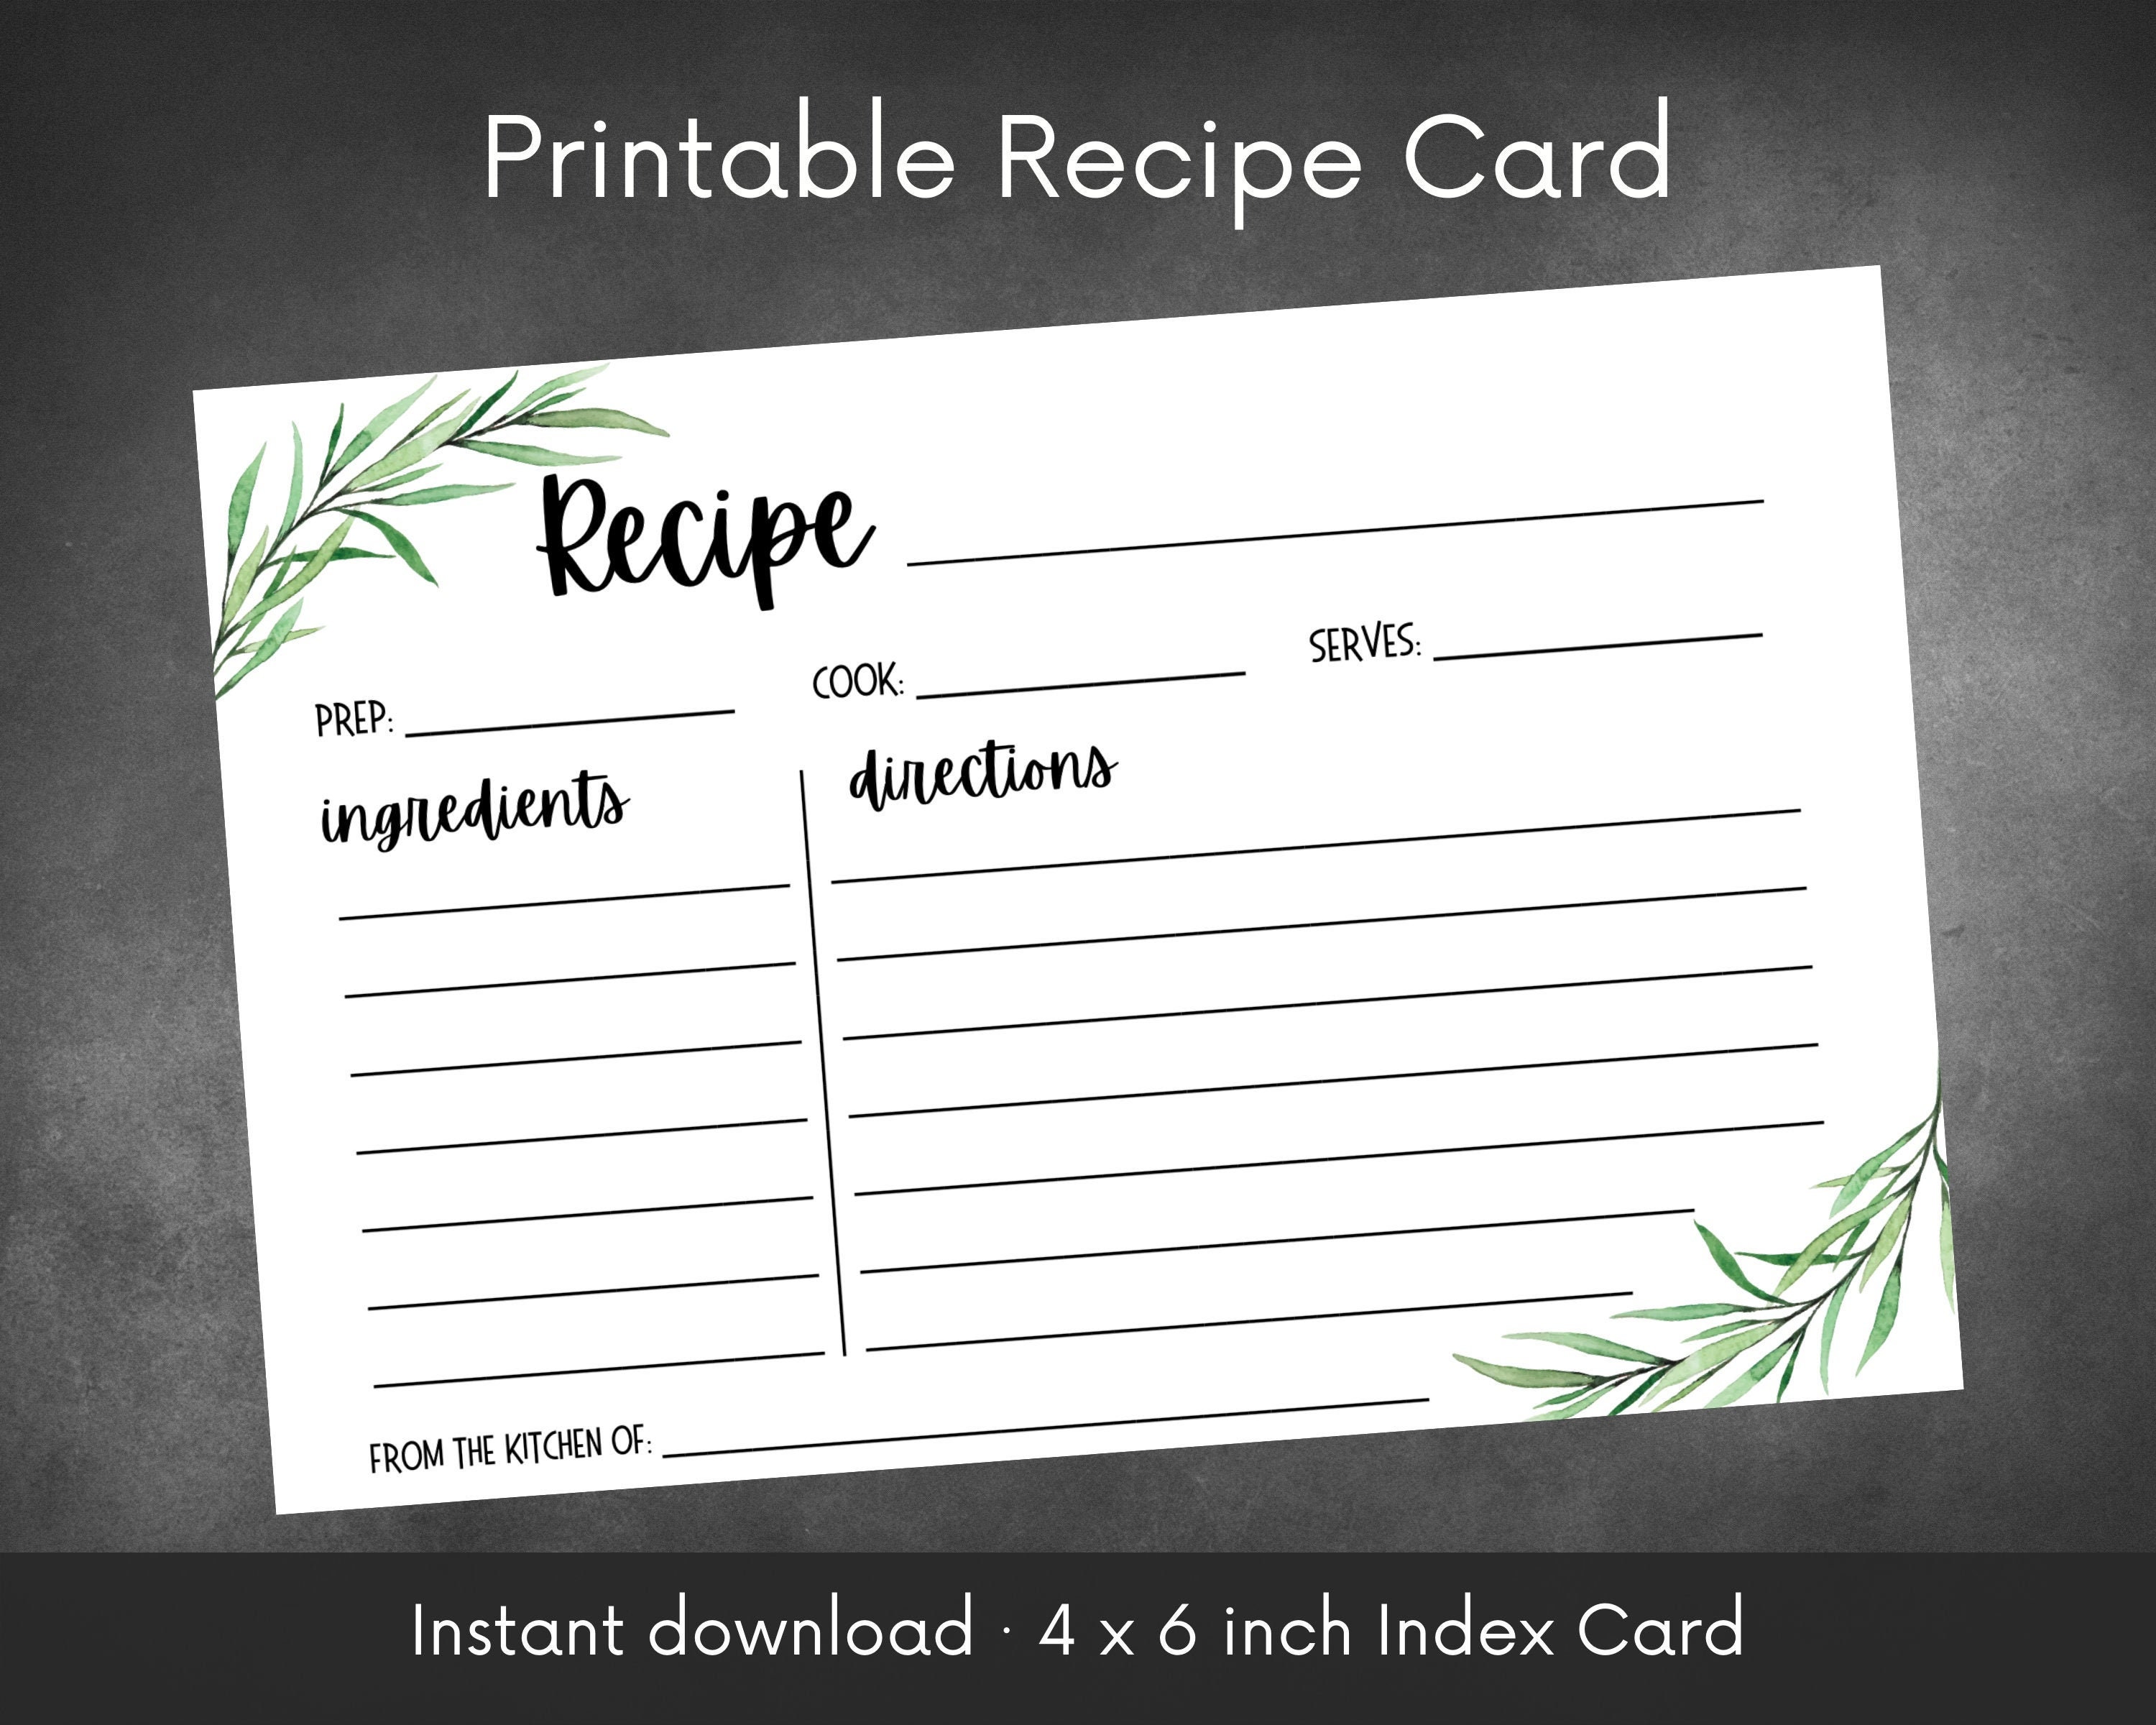 Free Note Card Templates Printable [Word, PDF] 3x5, 4x6 Inches - Ideas